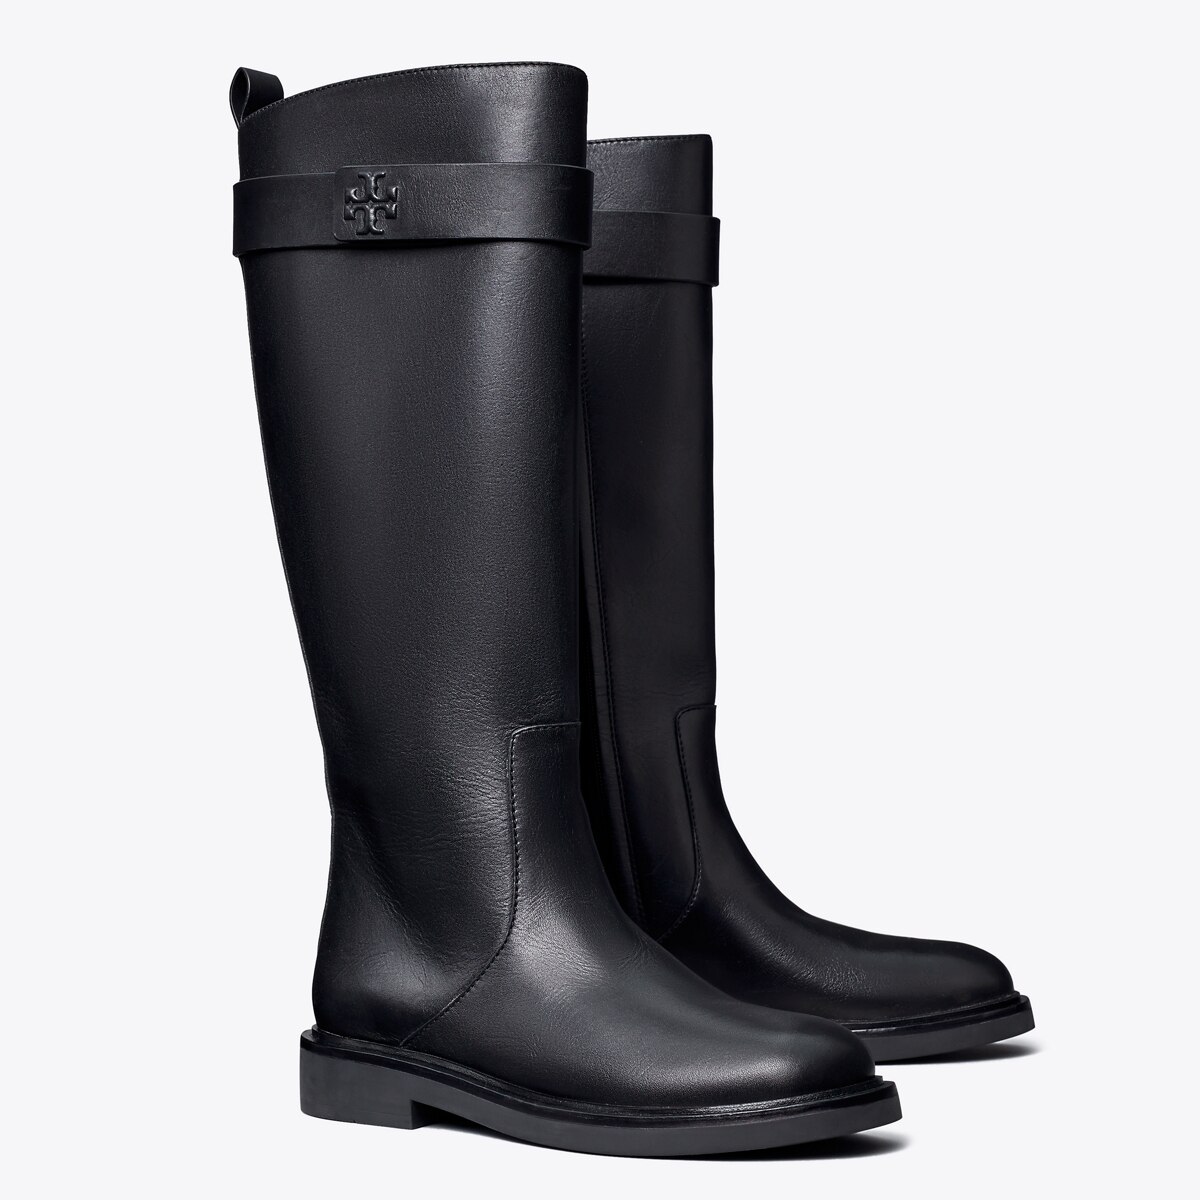 Double T Utility Boot: Women's Designer Boots | Tory Burch